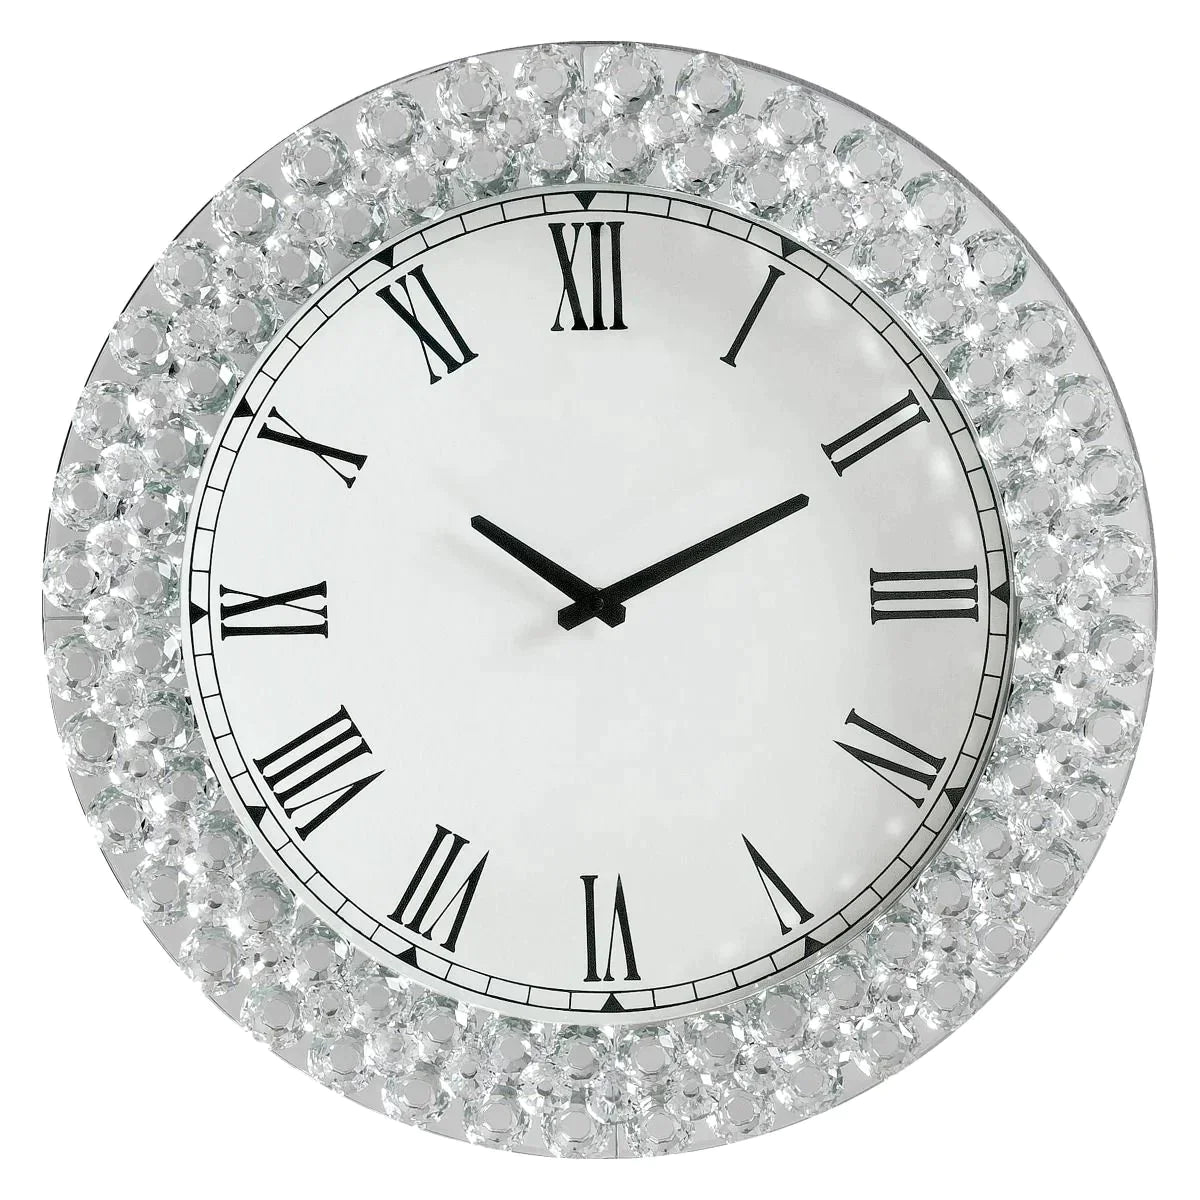 Lantana Mirrored & Faux Crystals Wall Clock Model 97043 By ACME Furniture